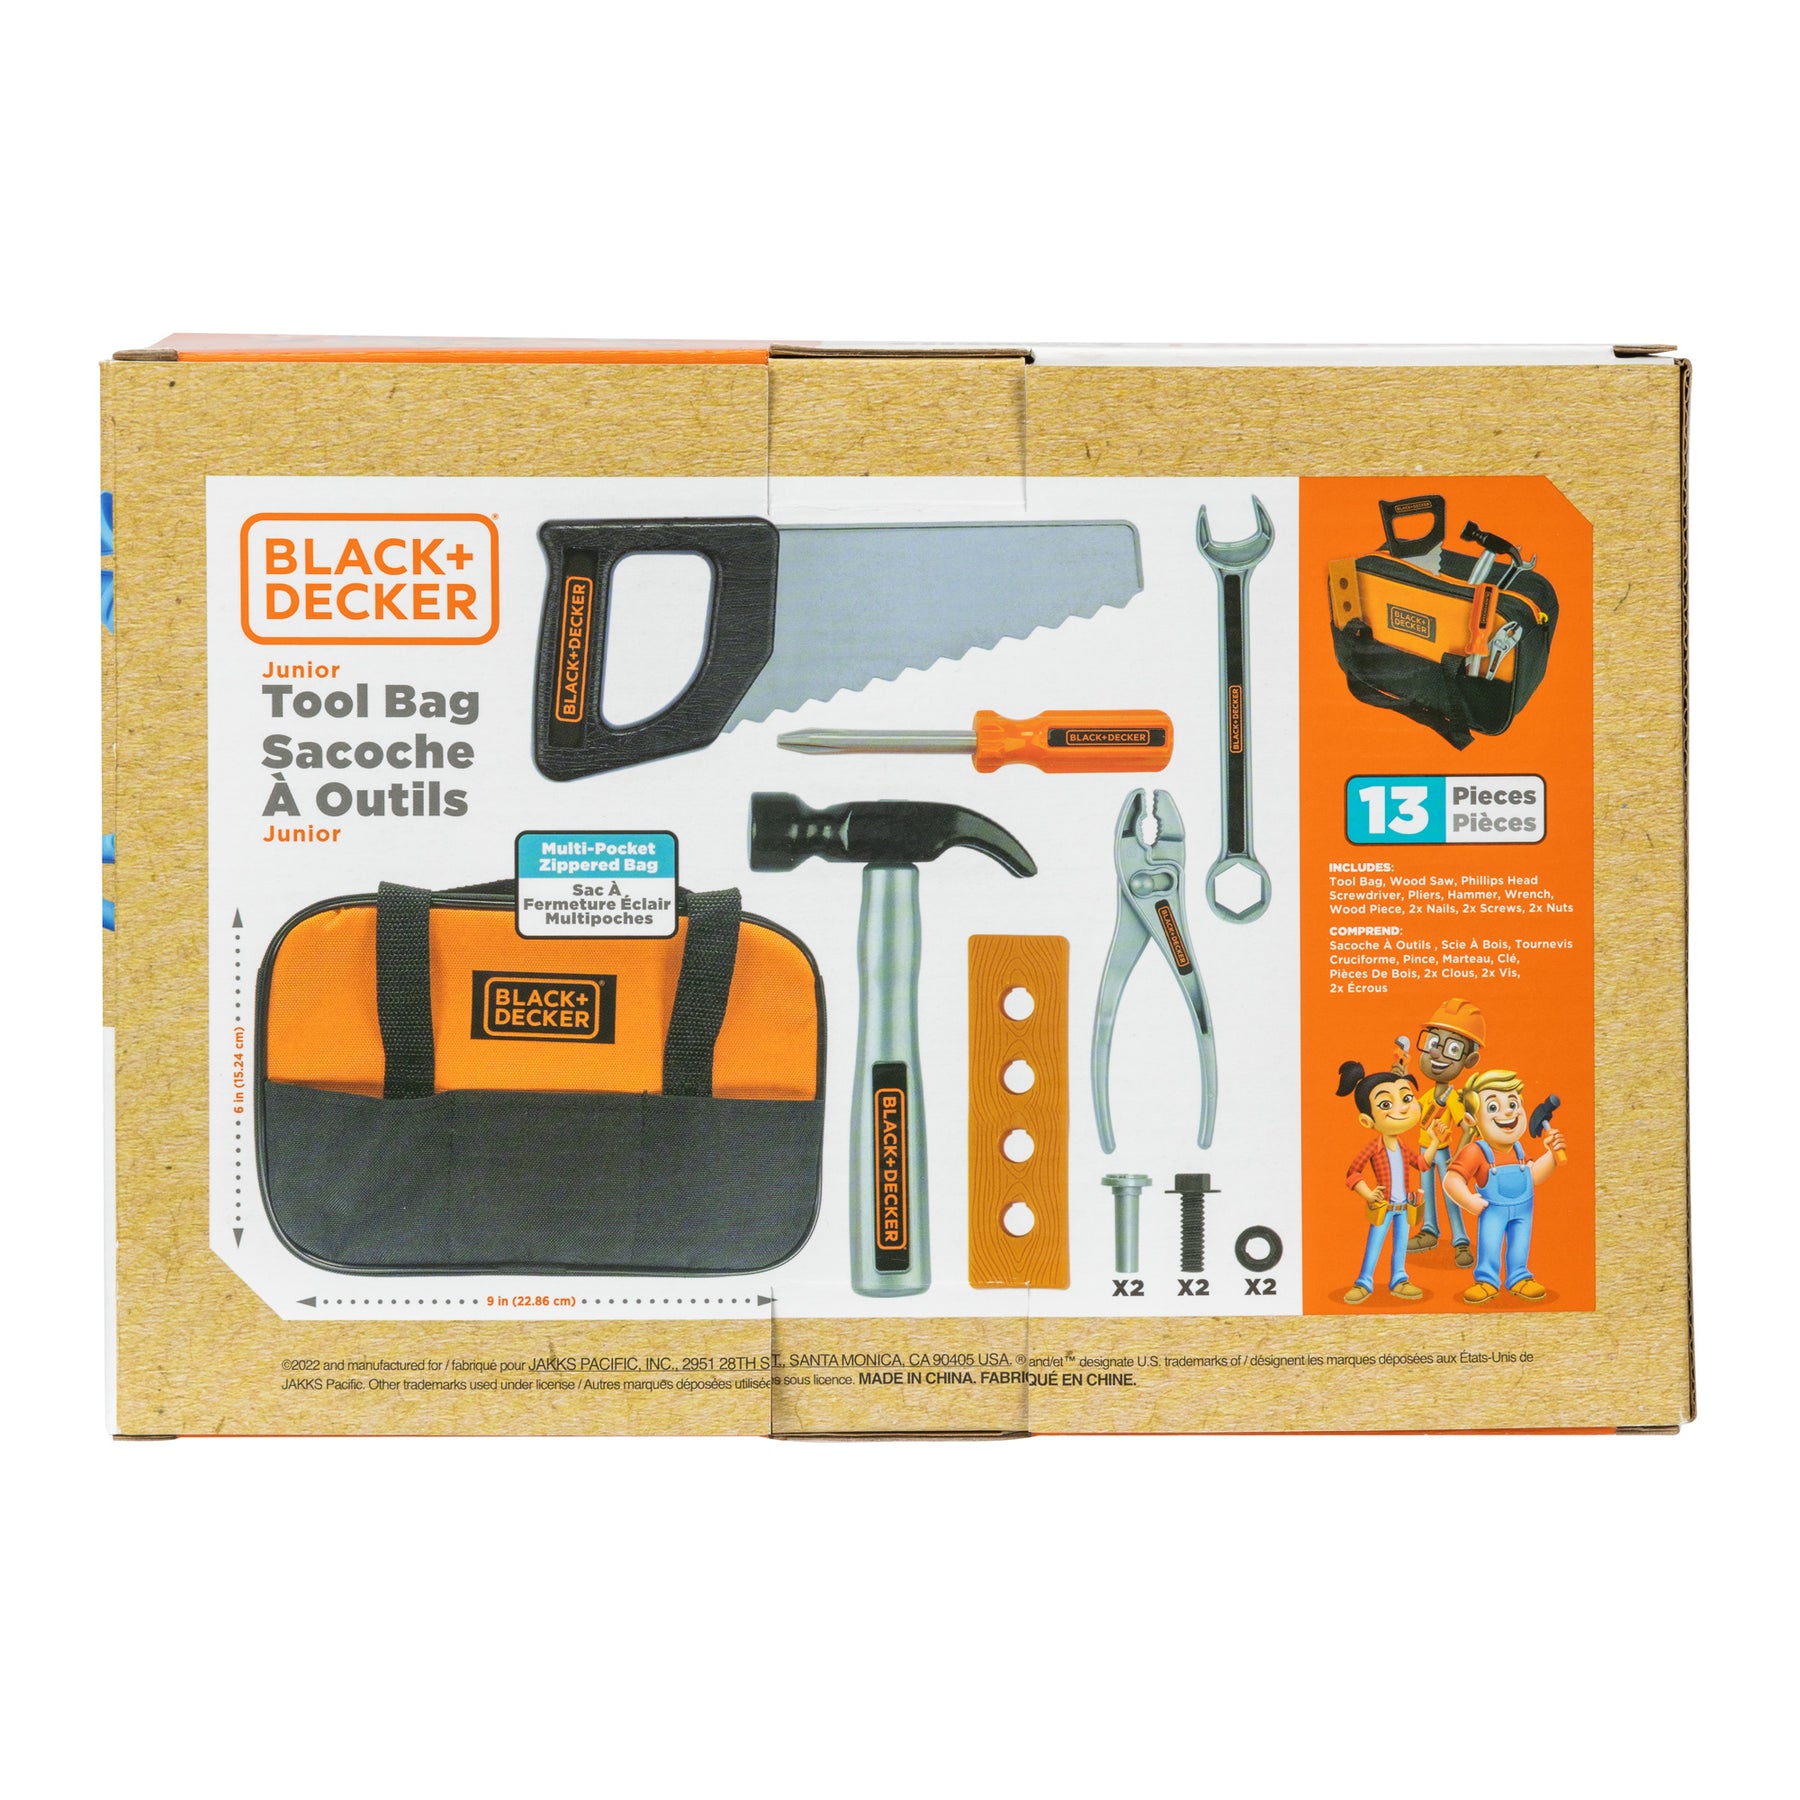  Black & Decker Jr. Learning Tool Set (15-Piece) B & D Tools and  Accessories Just Like Daddys' : Beauty & Personal Care